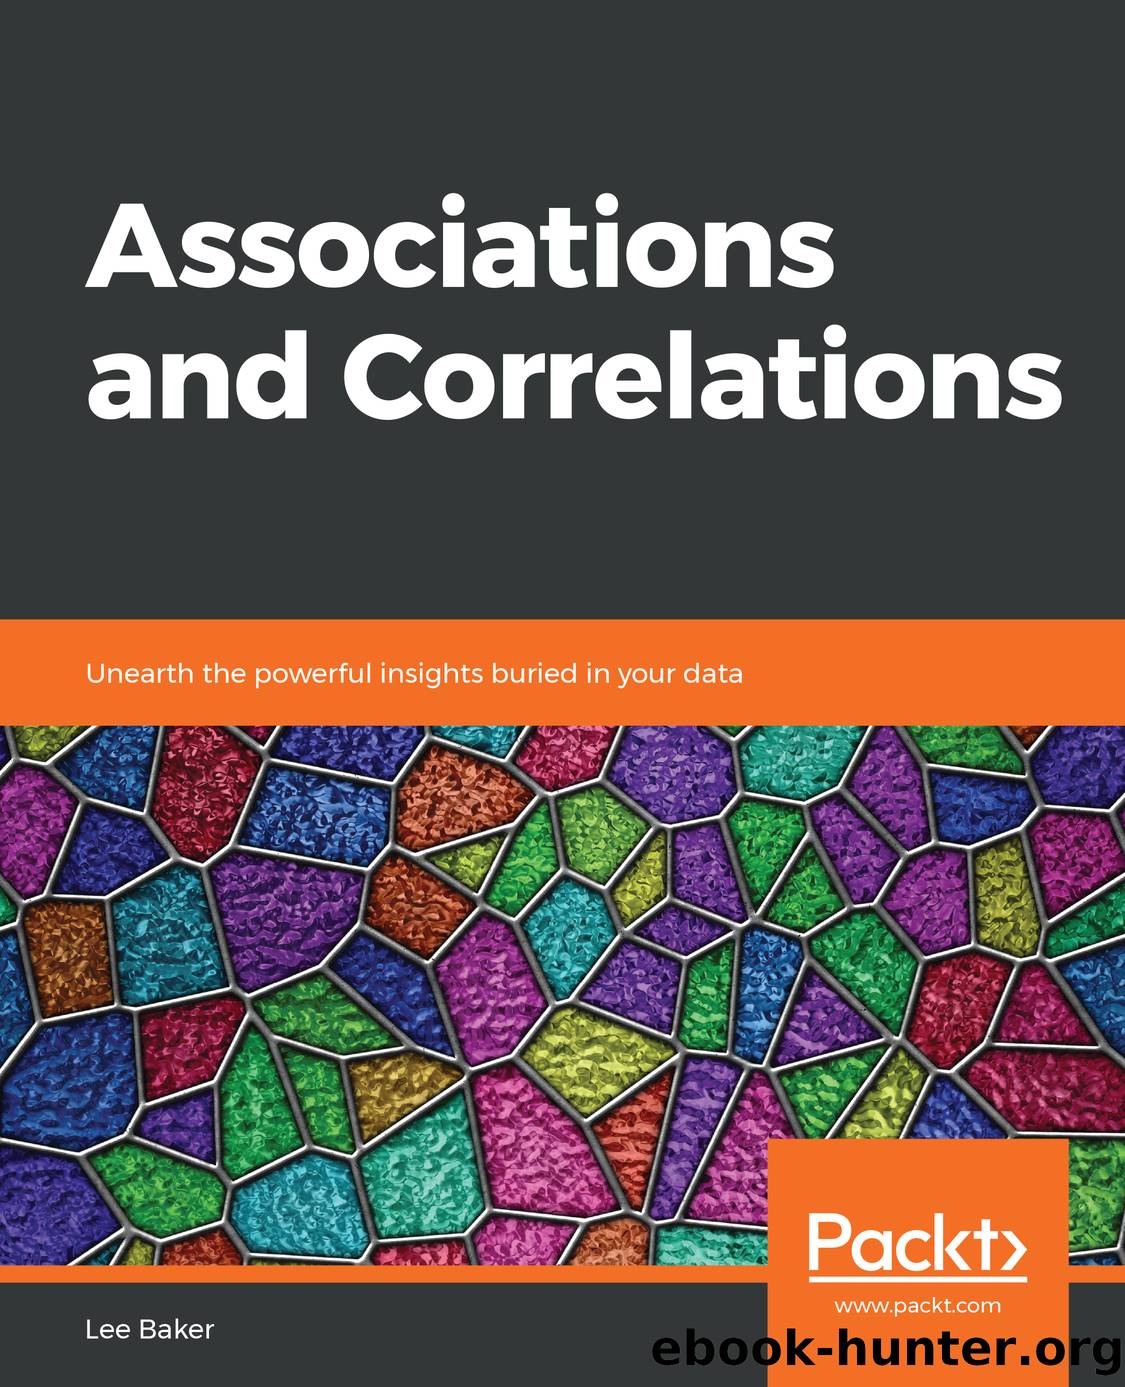 Associations and Correlations by Lee Baker